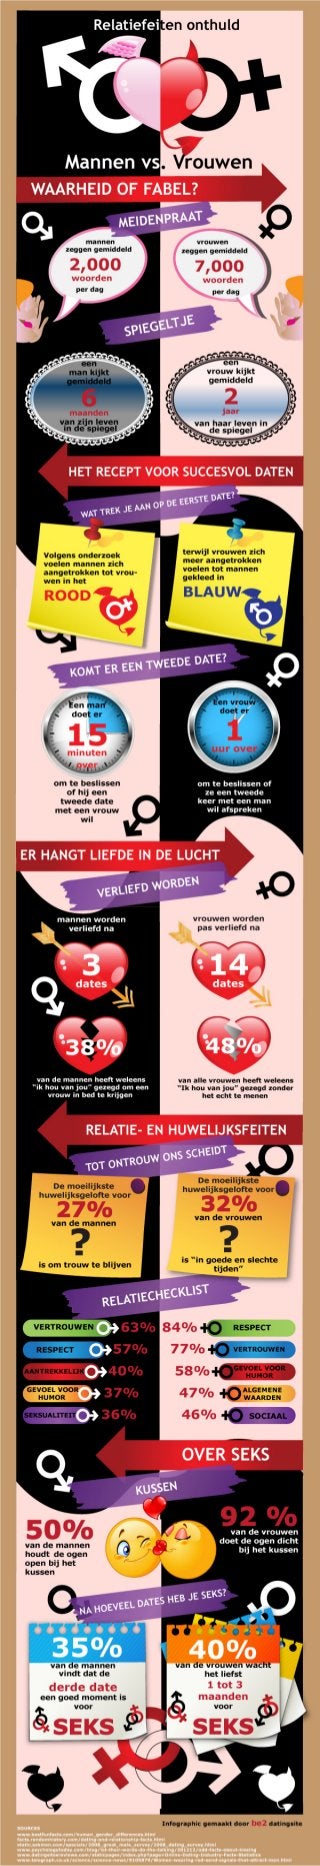 Infographic: Relationship Facts in Dutch